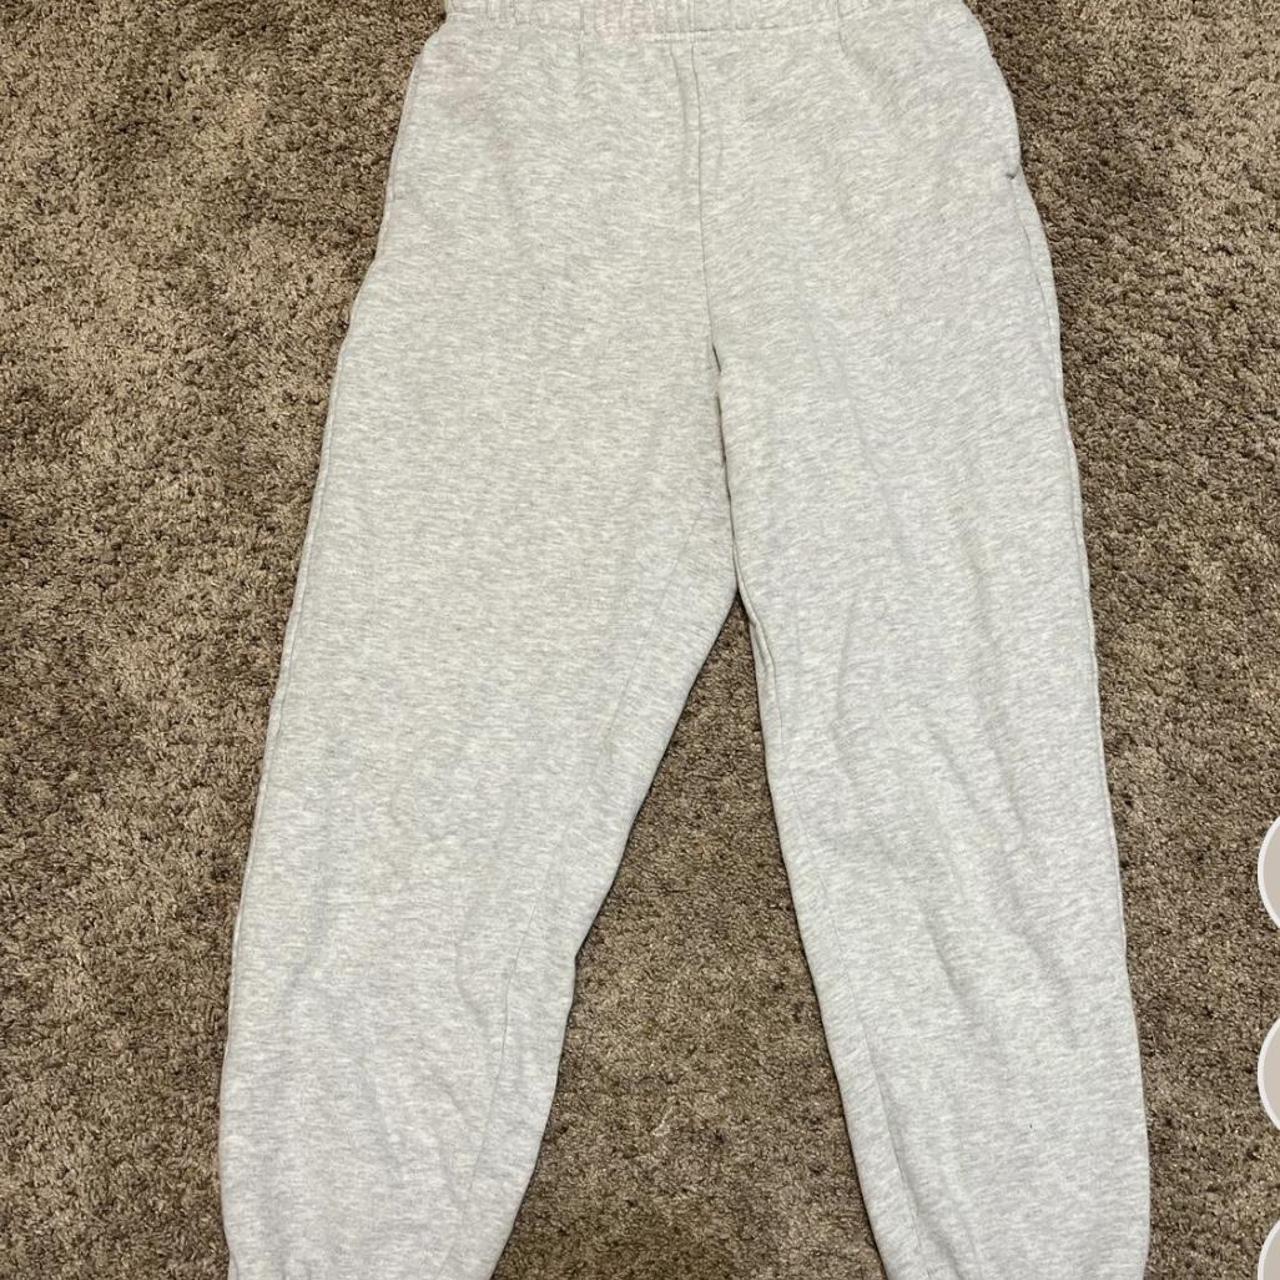 Pacsun Lazy sweatpants size small baggy and - Depop